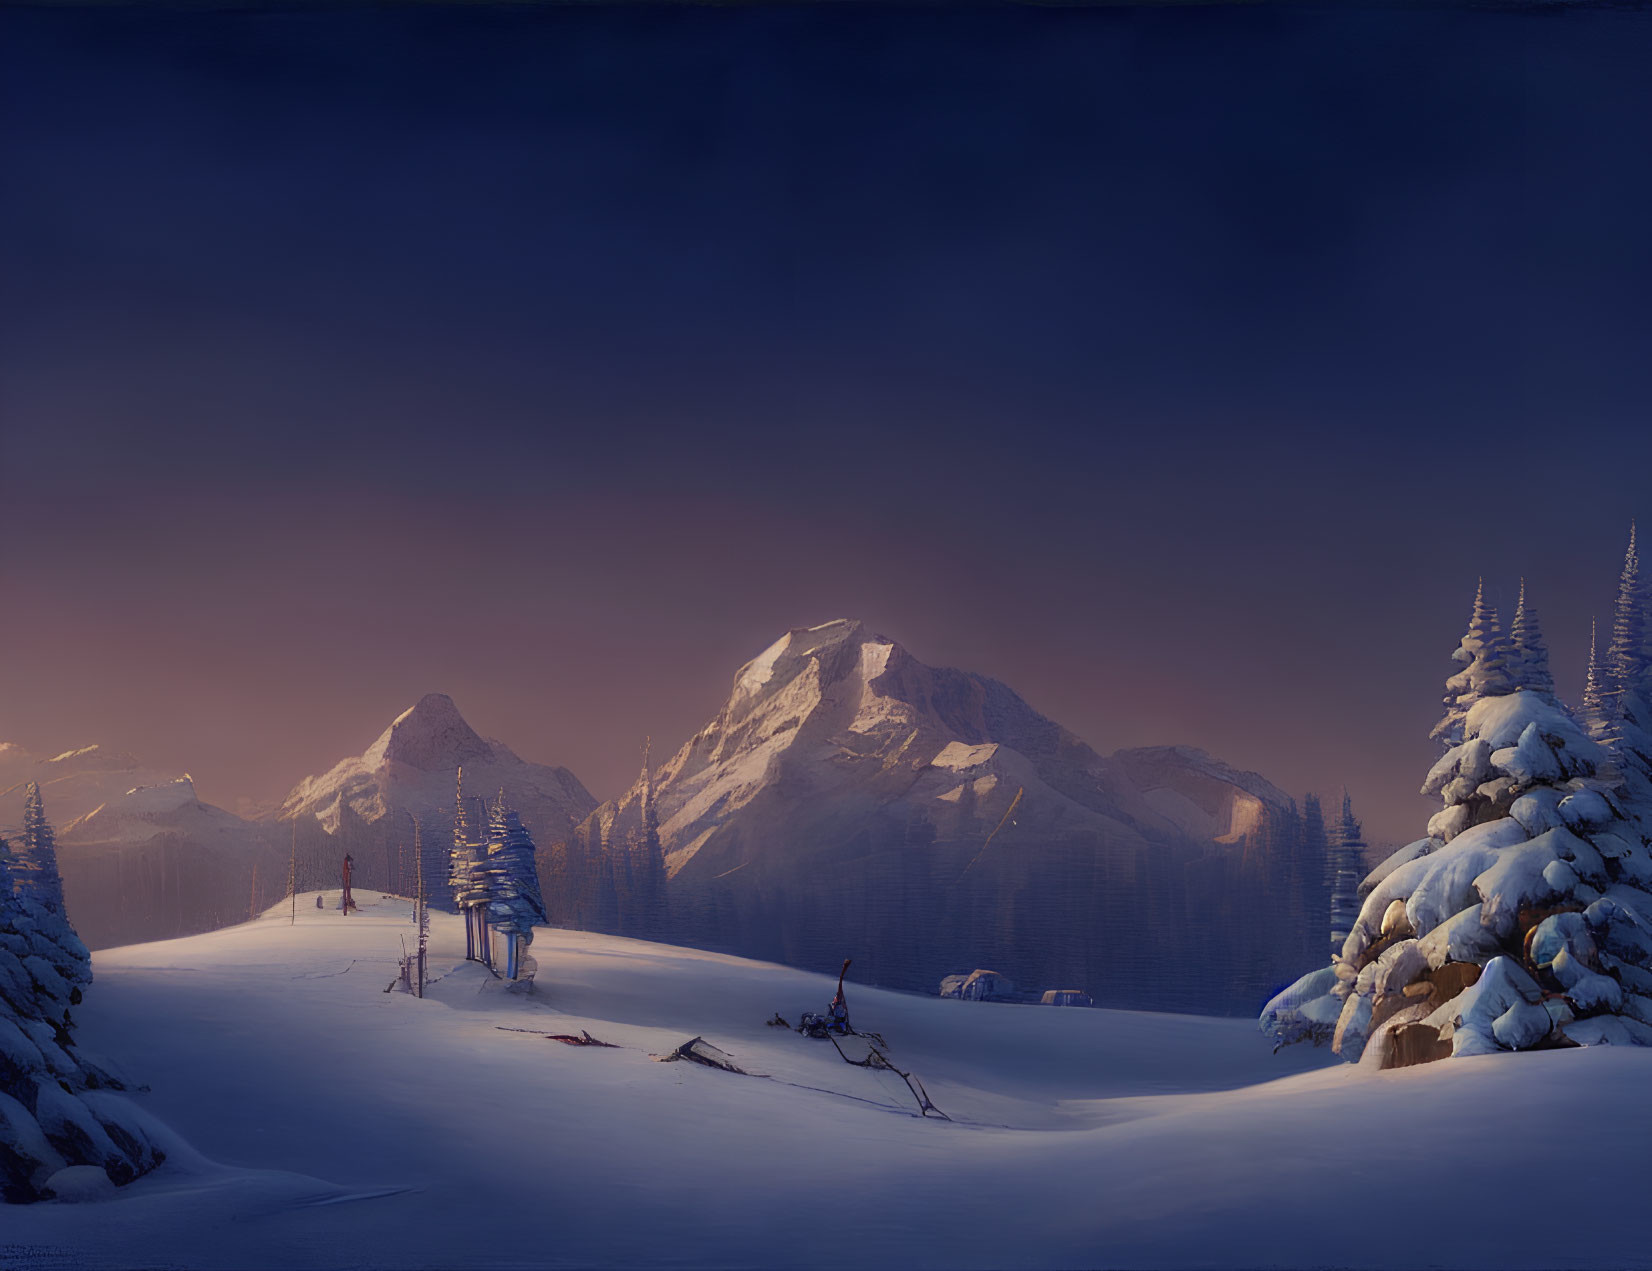 Snowy Alpine Scene: Skiers on Slope at Dusk, Mountains and Trees in Twilight